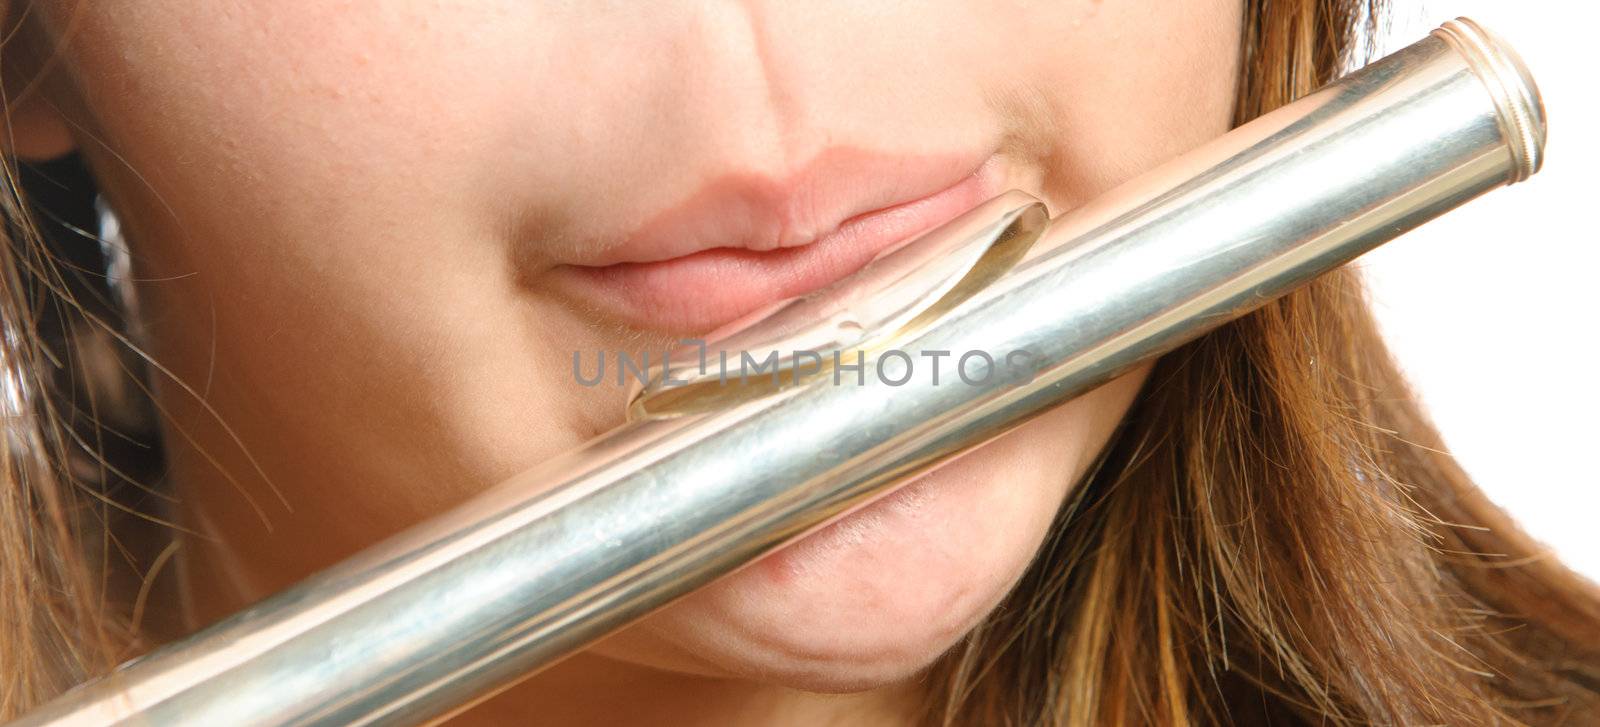 Closeup view of the way you are supposed to blow on the mouth piece of a flute for it to make noise.